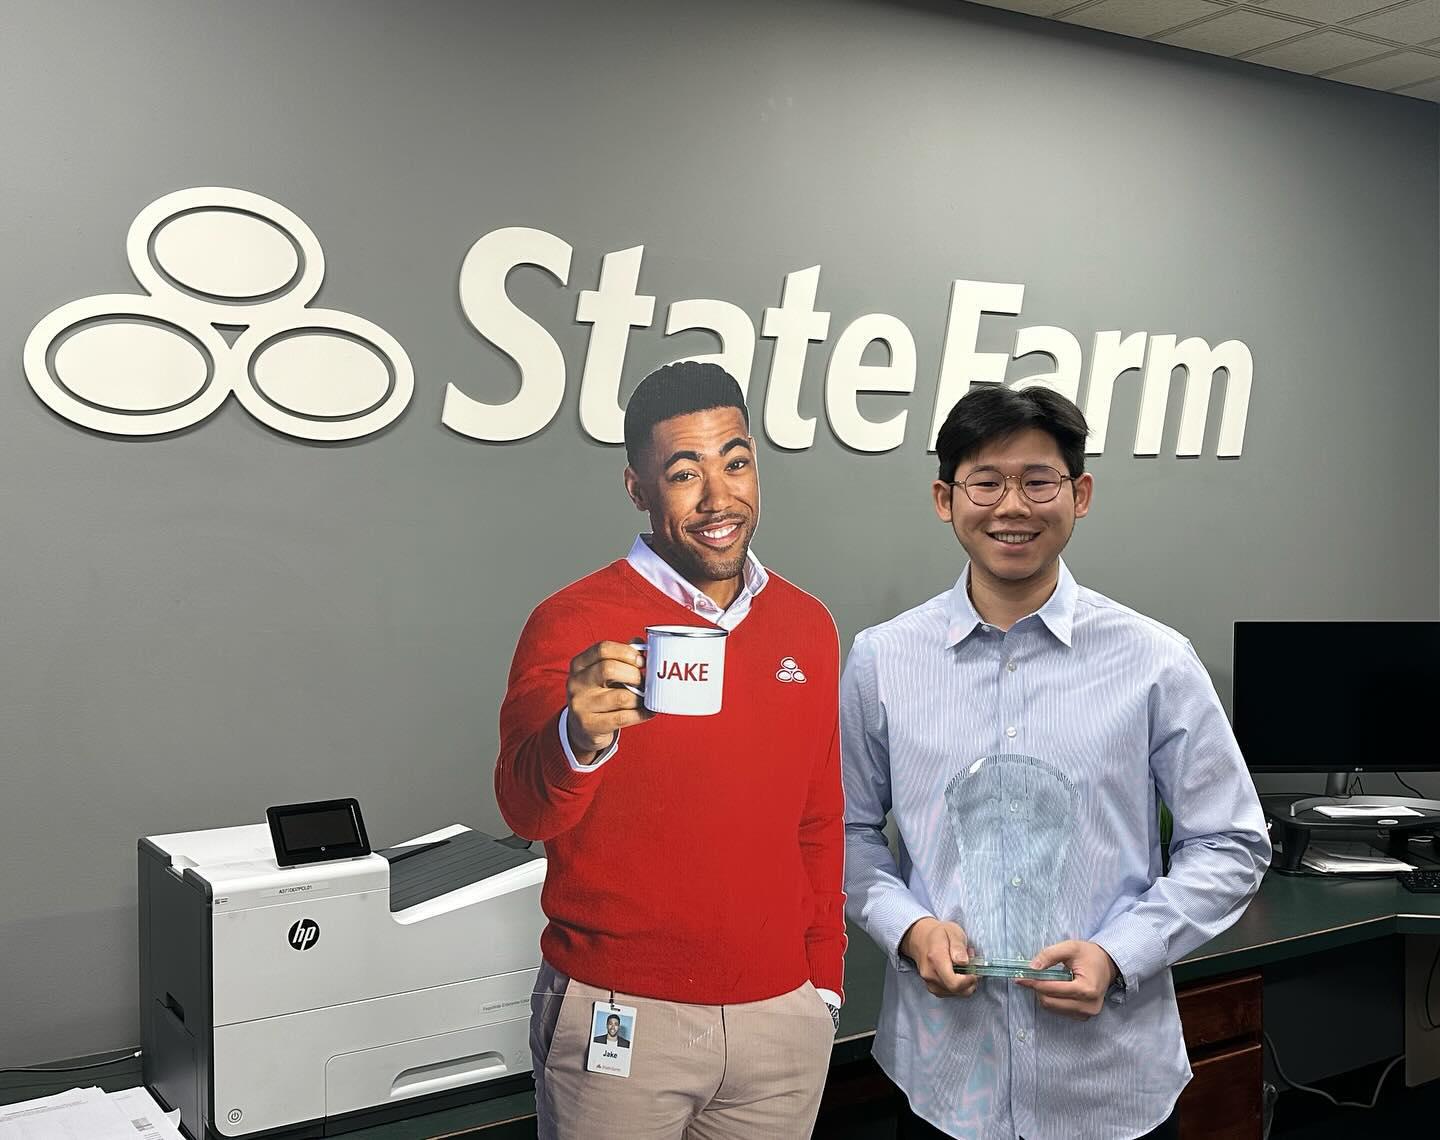 Our office is so proud of our Senior Account Manager, Austin Chun, for coming in first place for life insurance production at the annual Team Member Hall of Fame event a few weeks ago! 🏆🥇Thank you to our fellow Oregon State Farm agents for putting this event together to celebrate all of our team members and their awesome growth and achievements!